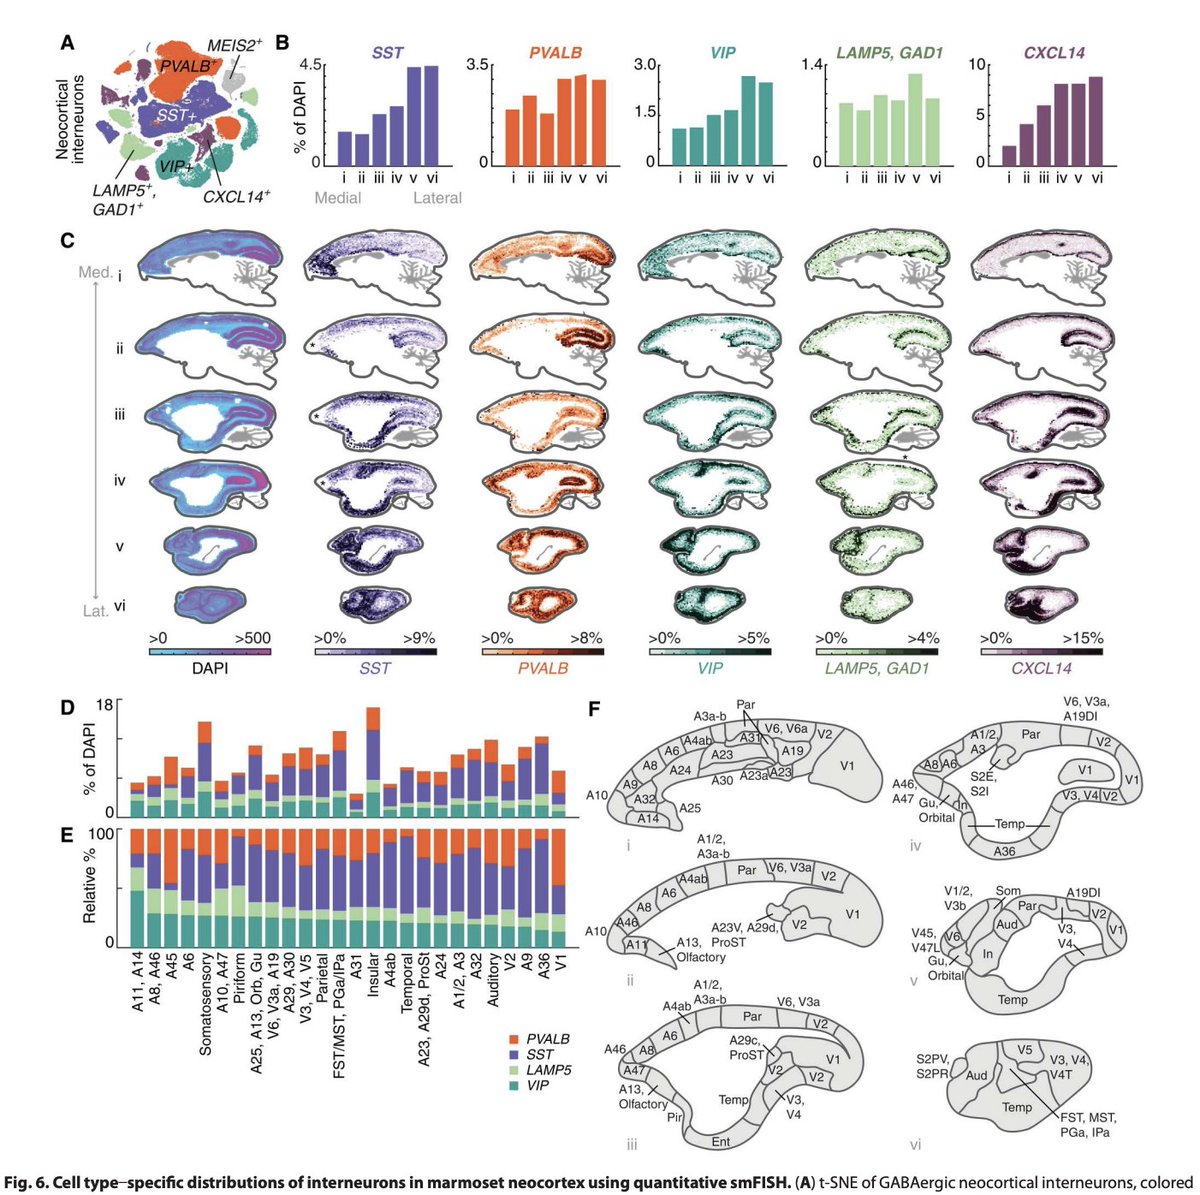 #215: A marmoset brain cell census reveals regional specialization of cellular identities @fennamk @eboyden3 @s_mccarroll Feng Massive resource on cell type identities and distributions across a nonhuman primate's brain! science.org/doi/10.1126/sc…